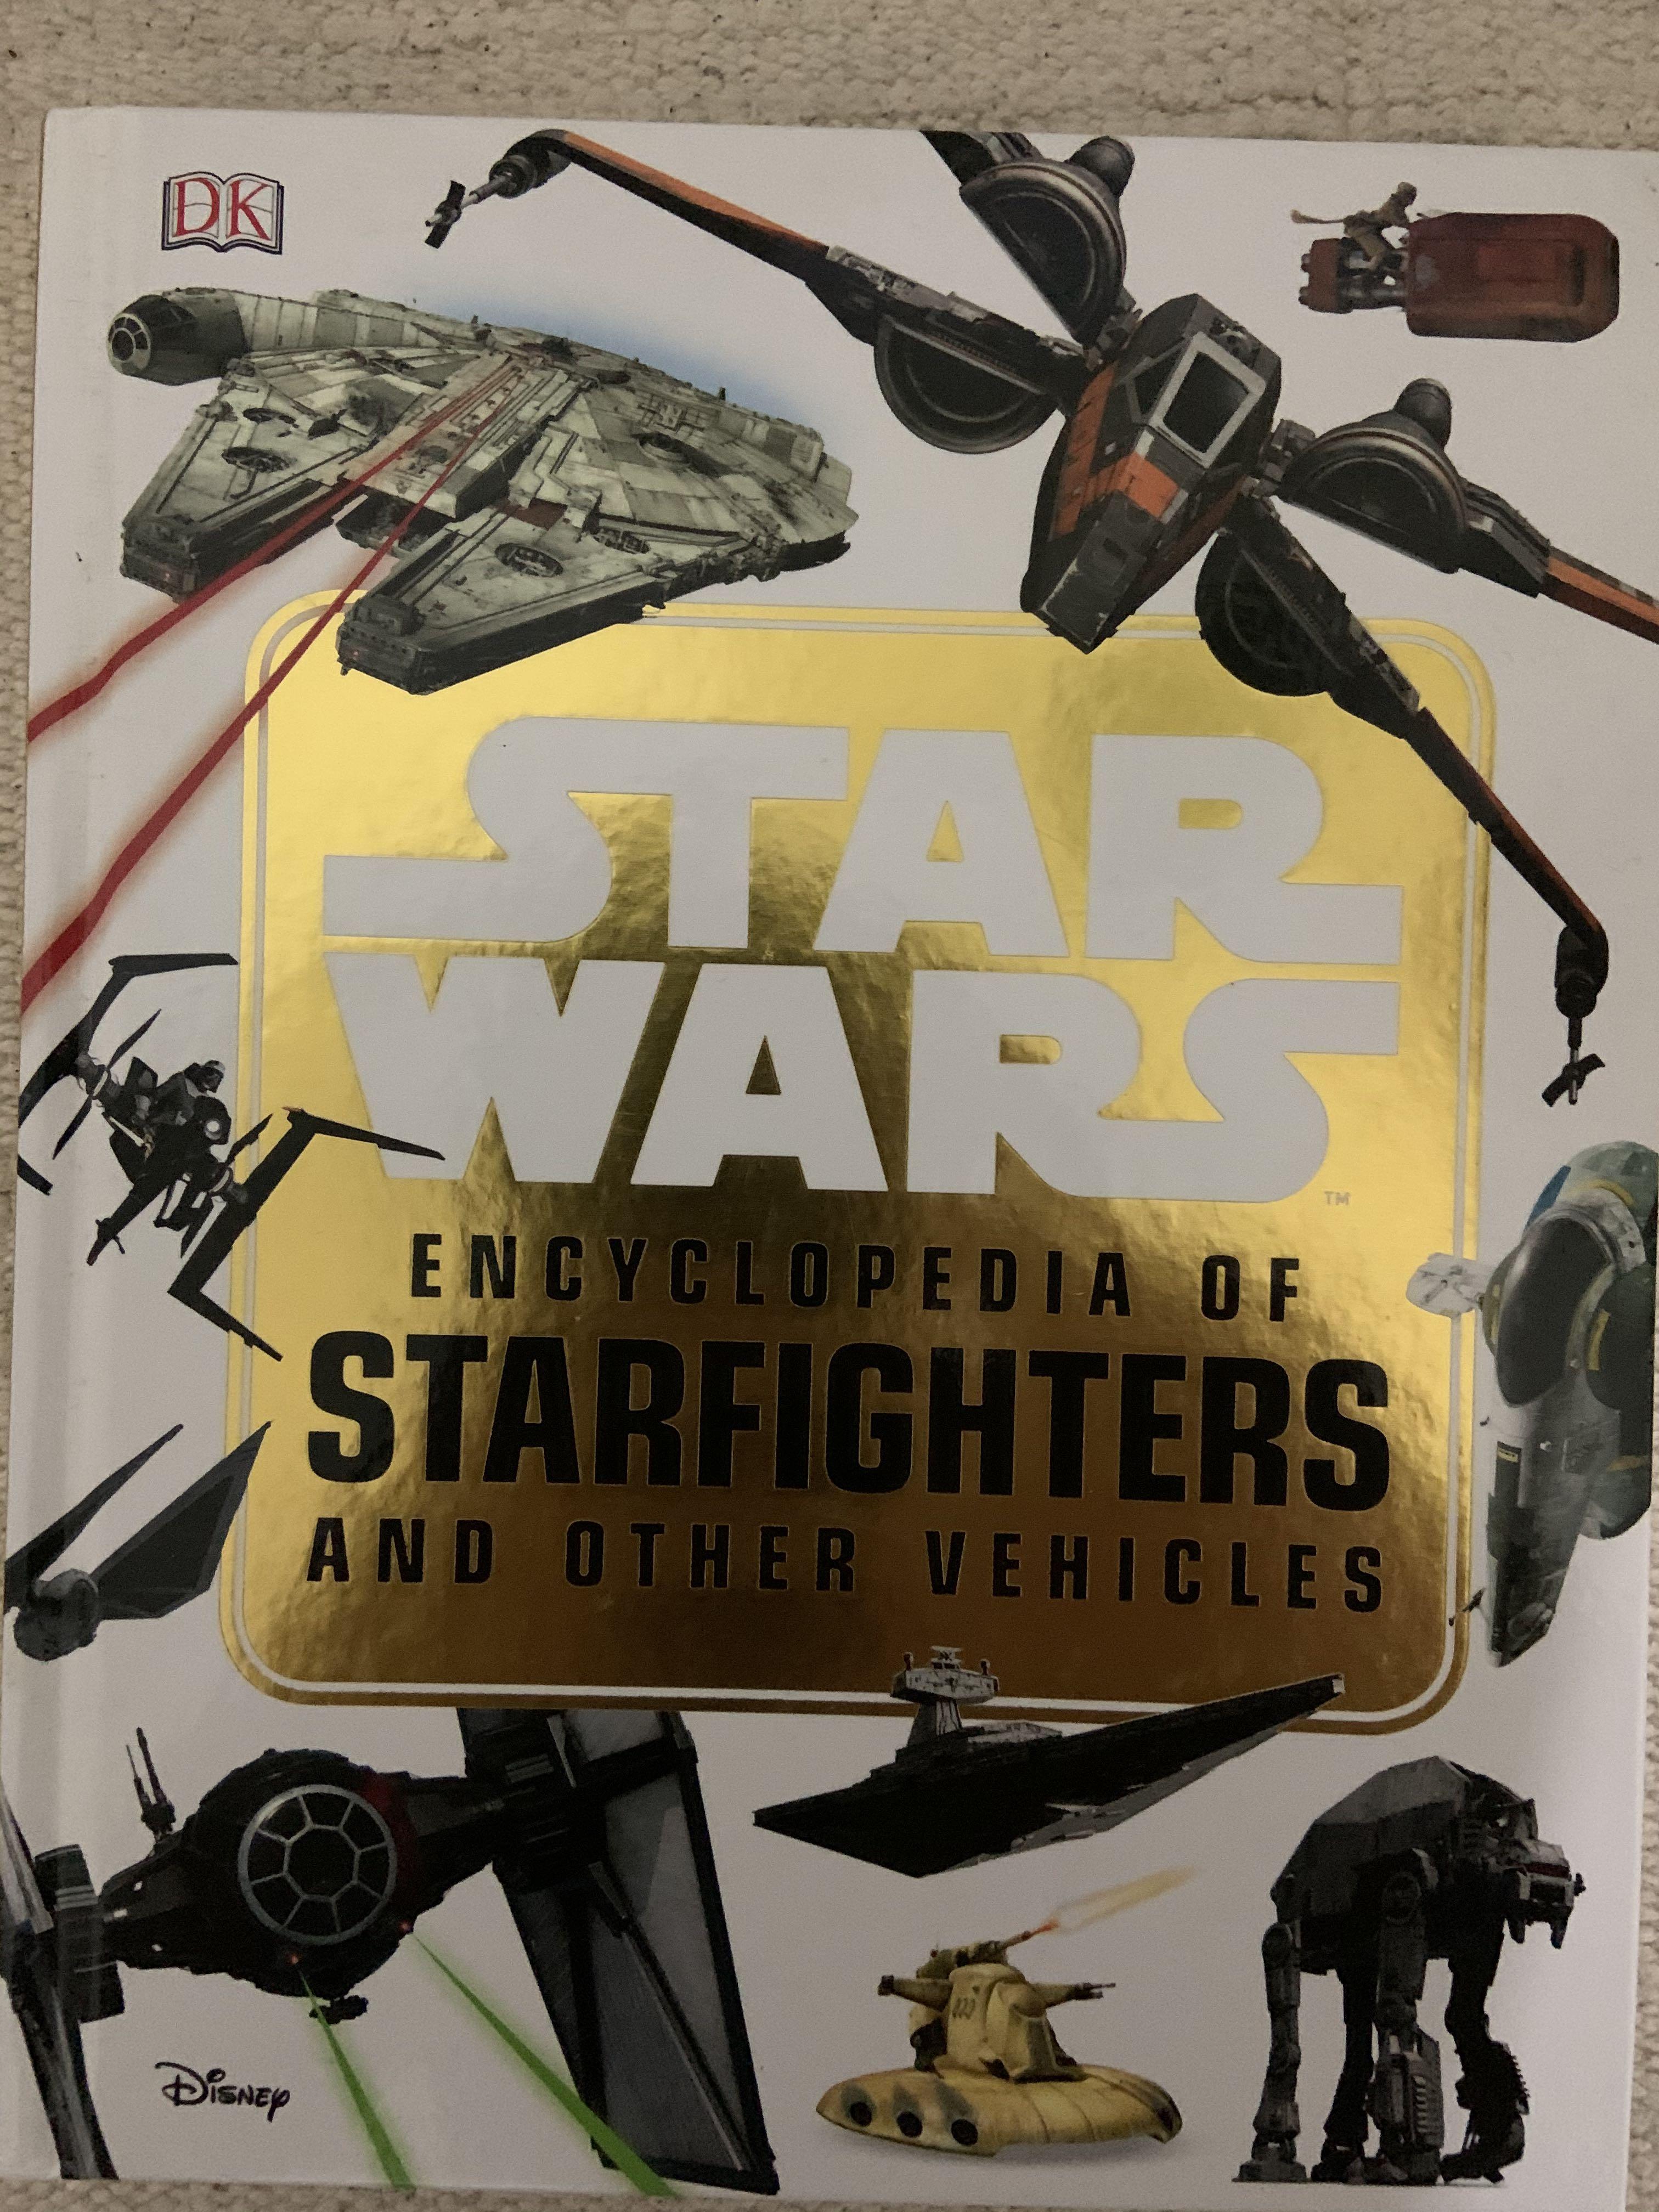 Fan　on　Star　Carousell　Wars　Memorabilia,　Hobbies　Starfighters　Encyclopedia,　Merchandise　Toys,　Collectibles